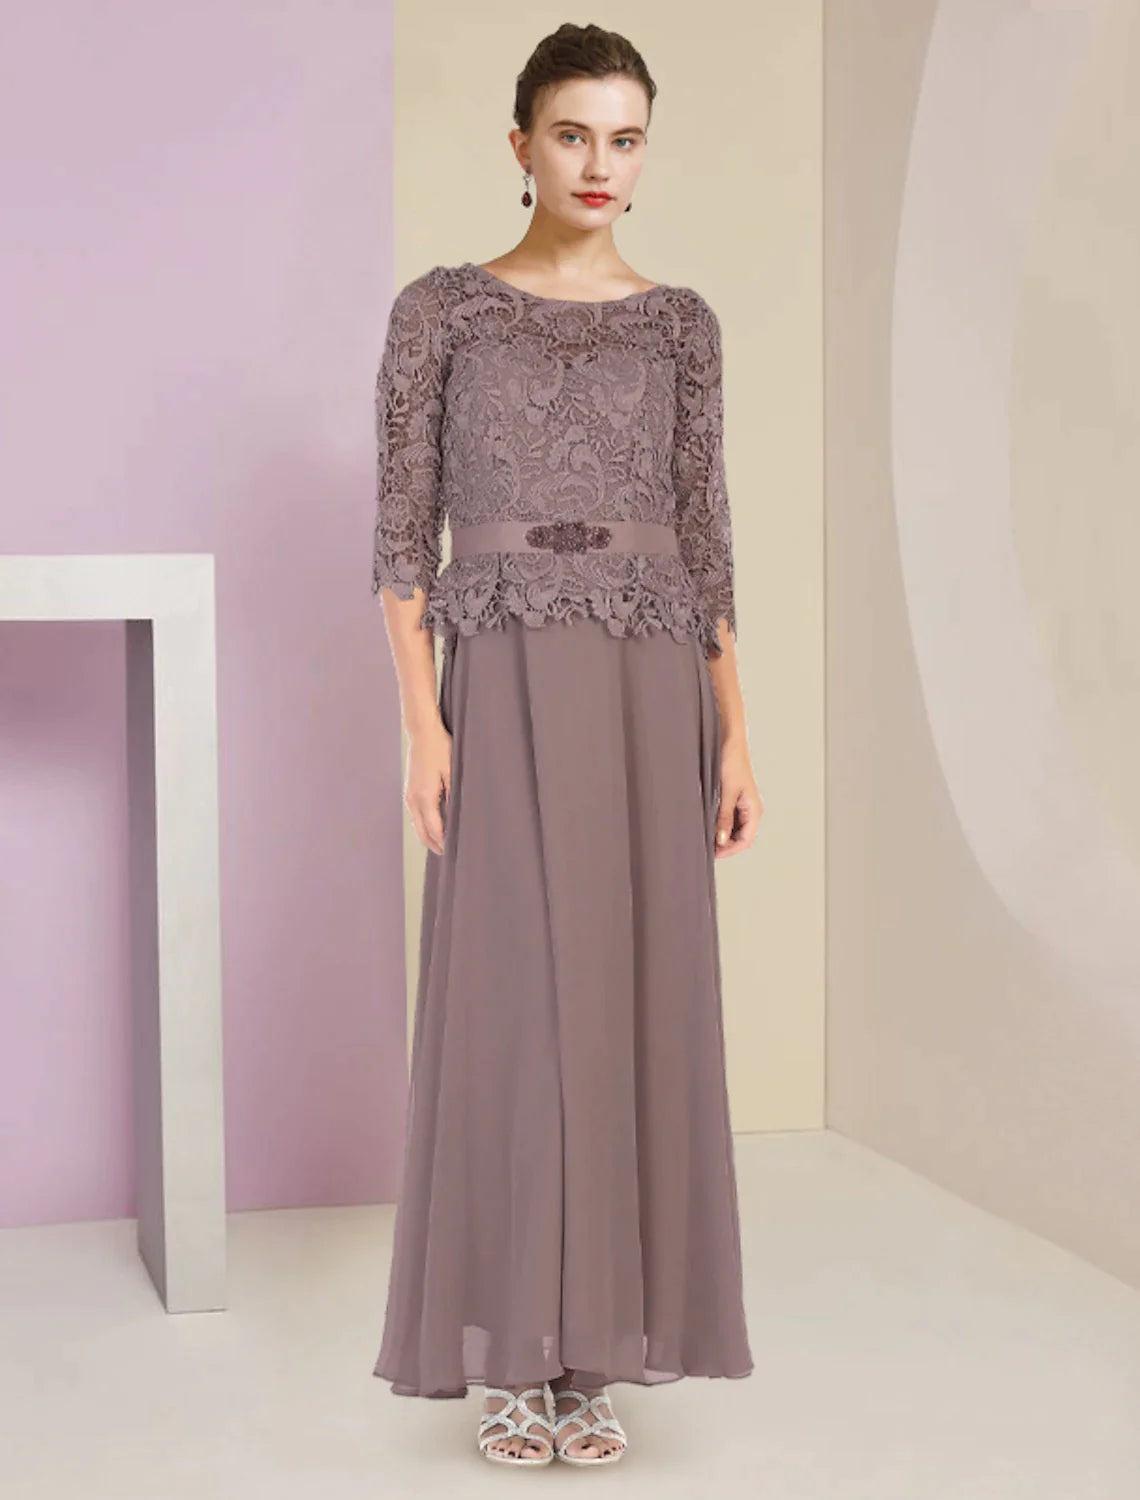 Two Piece A-Line Mother of the Bride Dress Formal Wedding Guest Elegant Scoop Neck Floor Length Chiffon Lace 3/4 Length Sleeve Wrap Included with Appliques Crystal Brooch